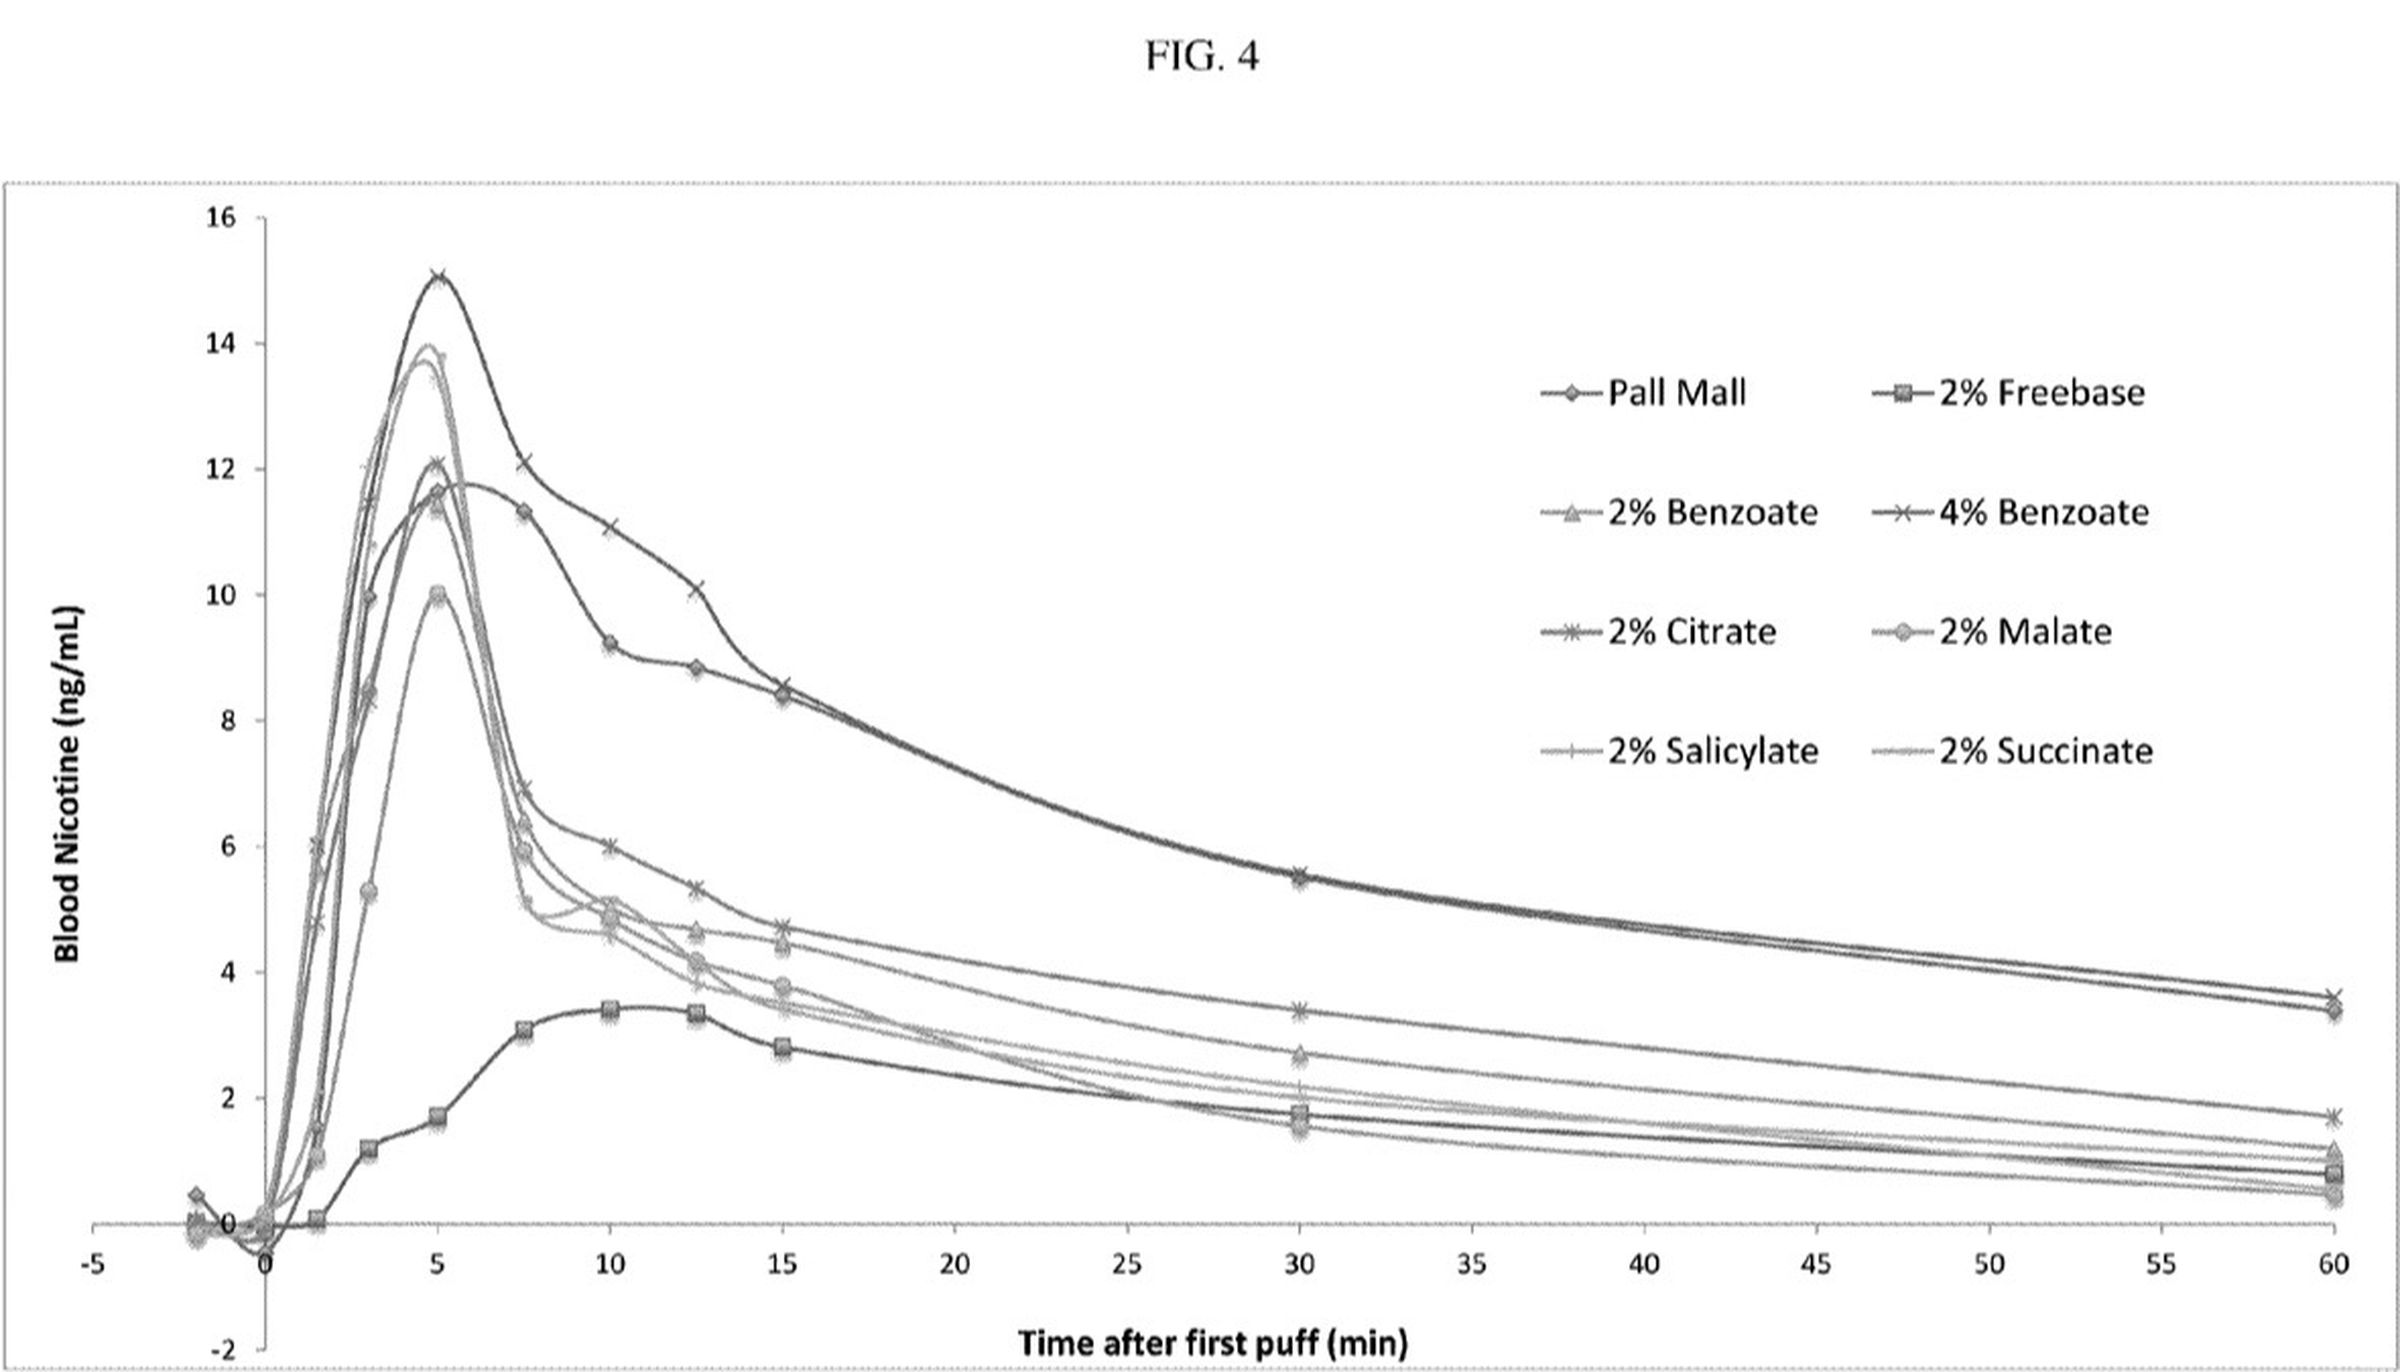 Nicotine levels in plasma after exposure to various nicotine salt formulations, freebase, and a Pall Mall cigarette. 